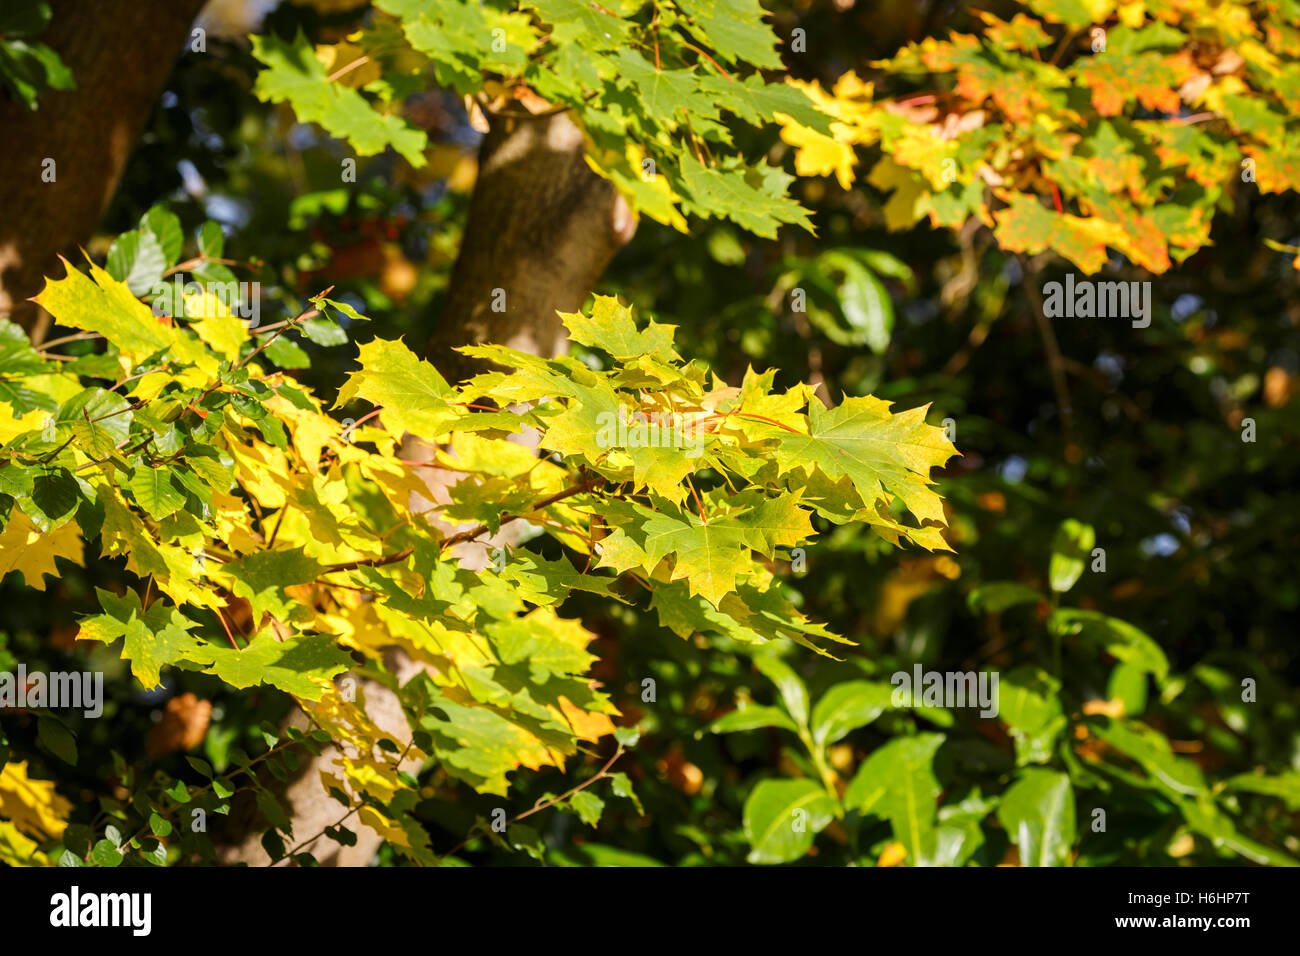 Sycamore (Acer pseudoplatanus) leaves still on the tree in pretty autumn colours in a garden in southern England Stock Photo